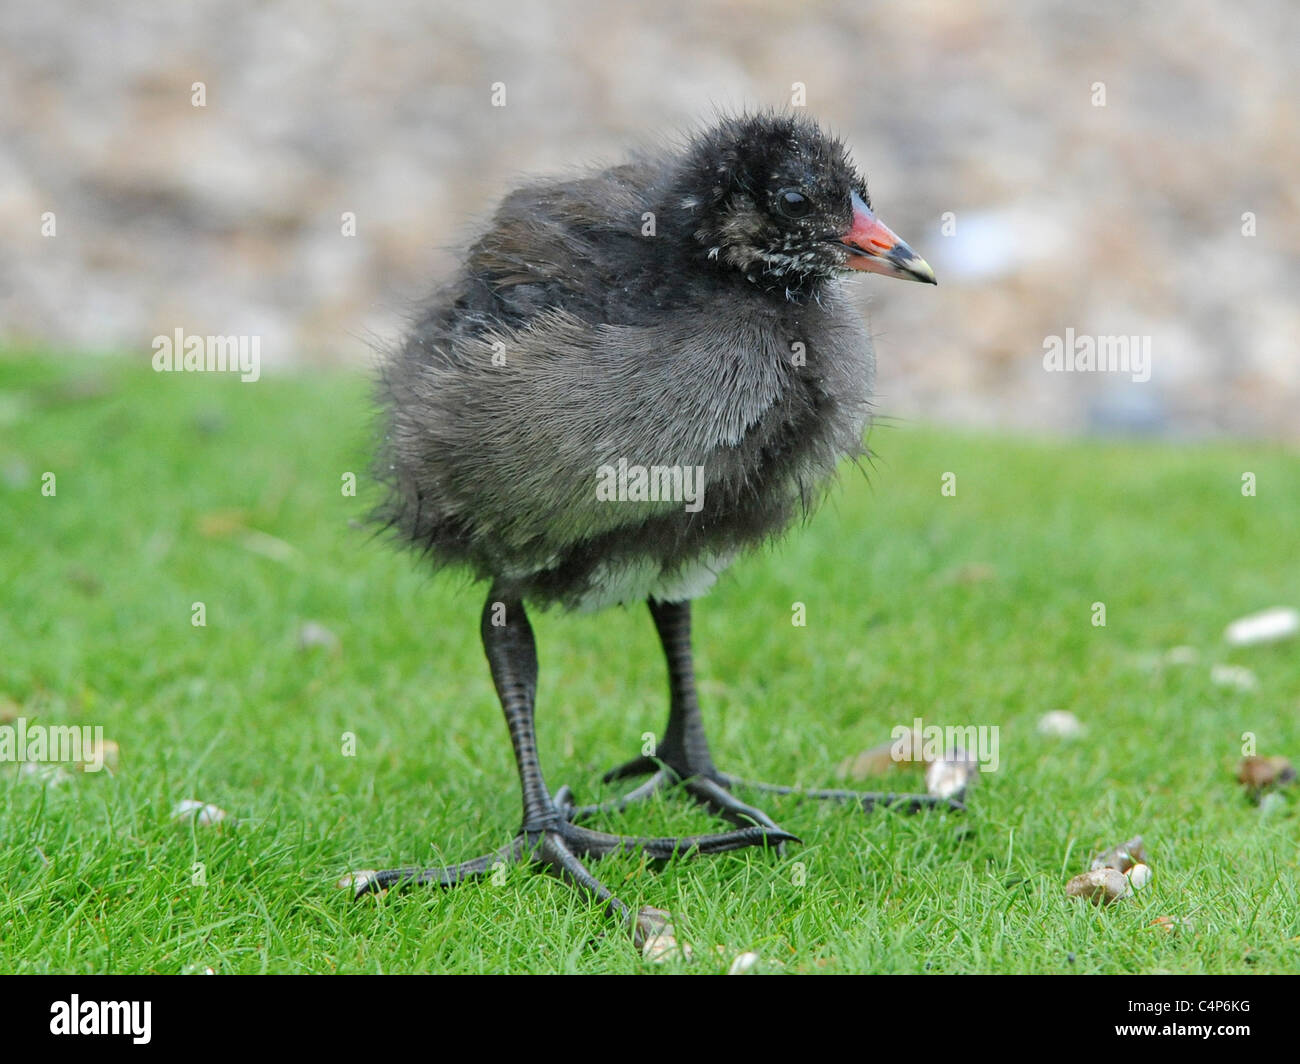 A young moorhen. Stock Photo